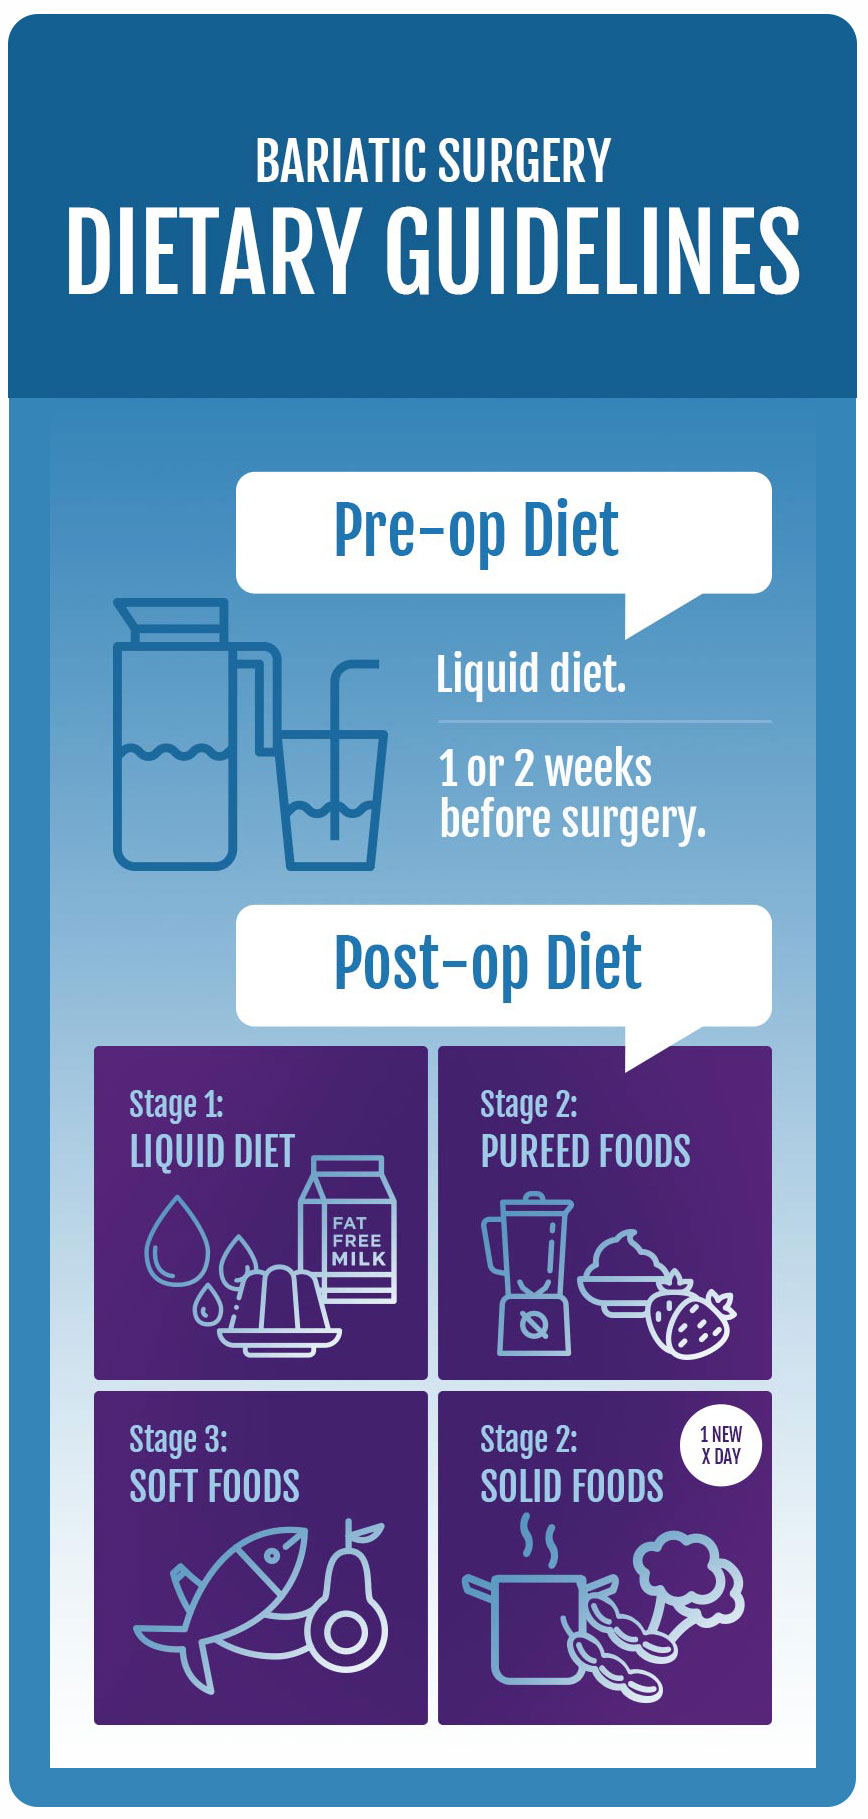 Post bariatric surgery diet